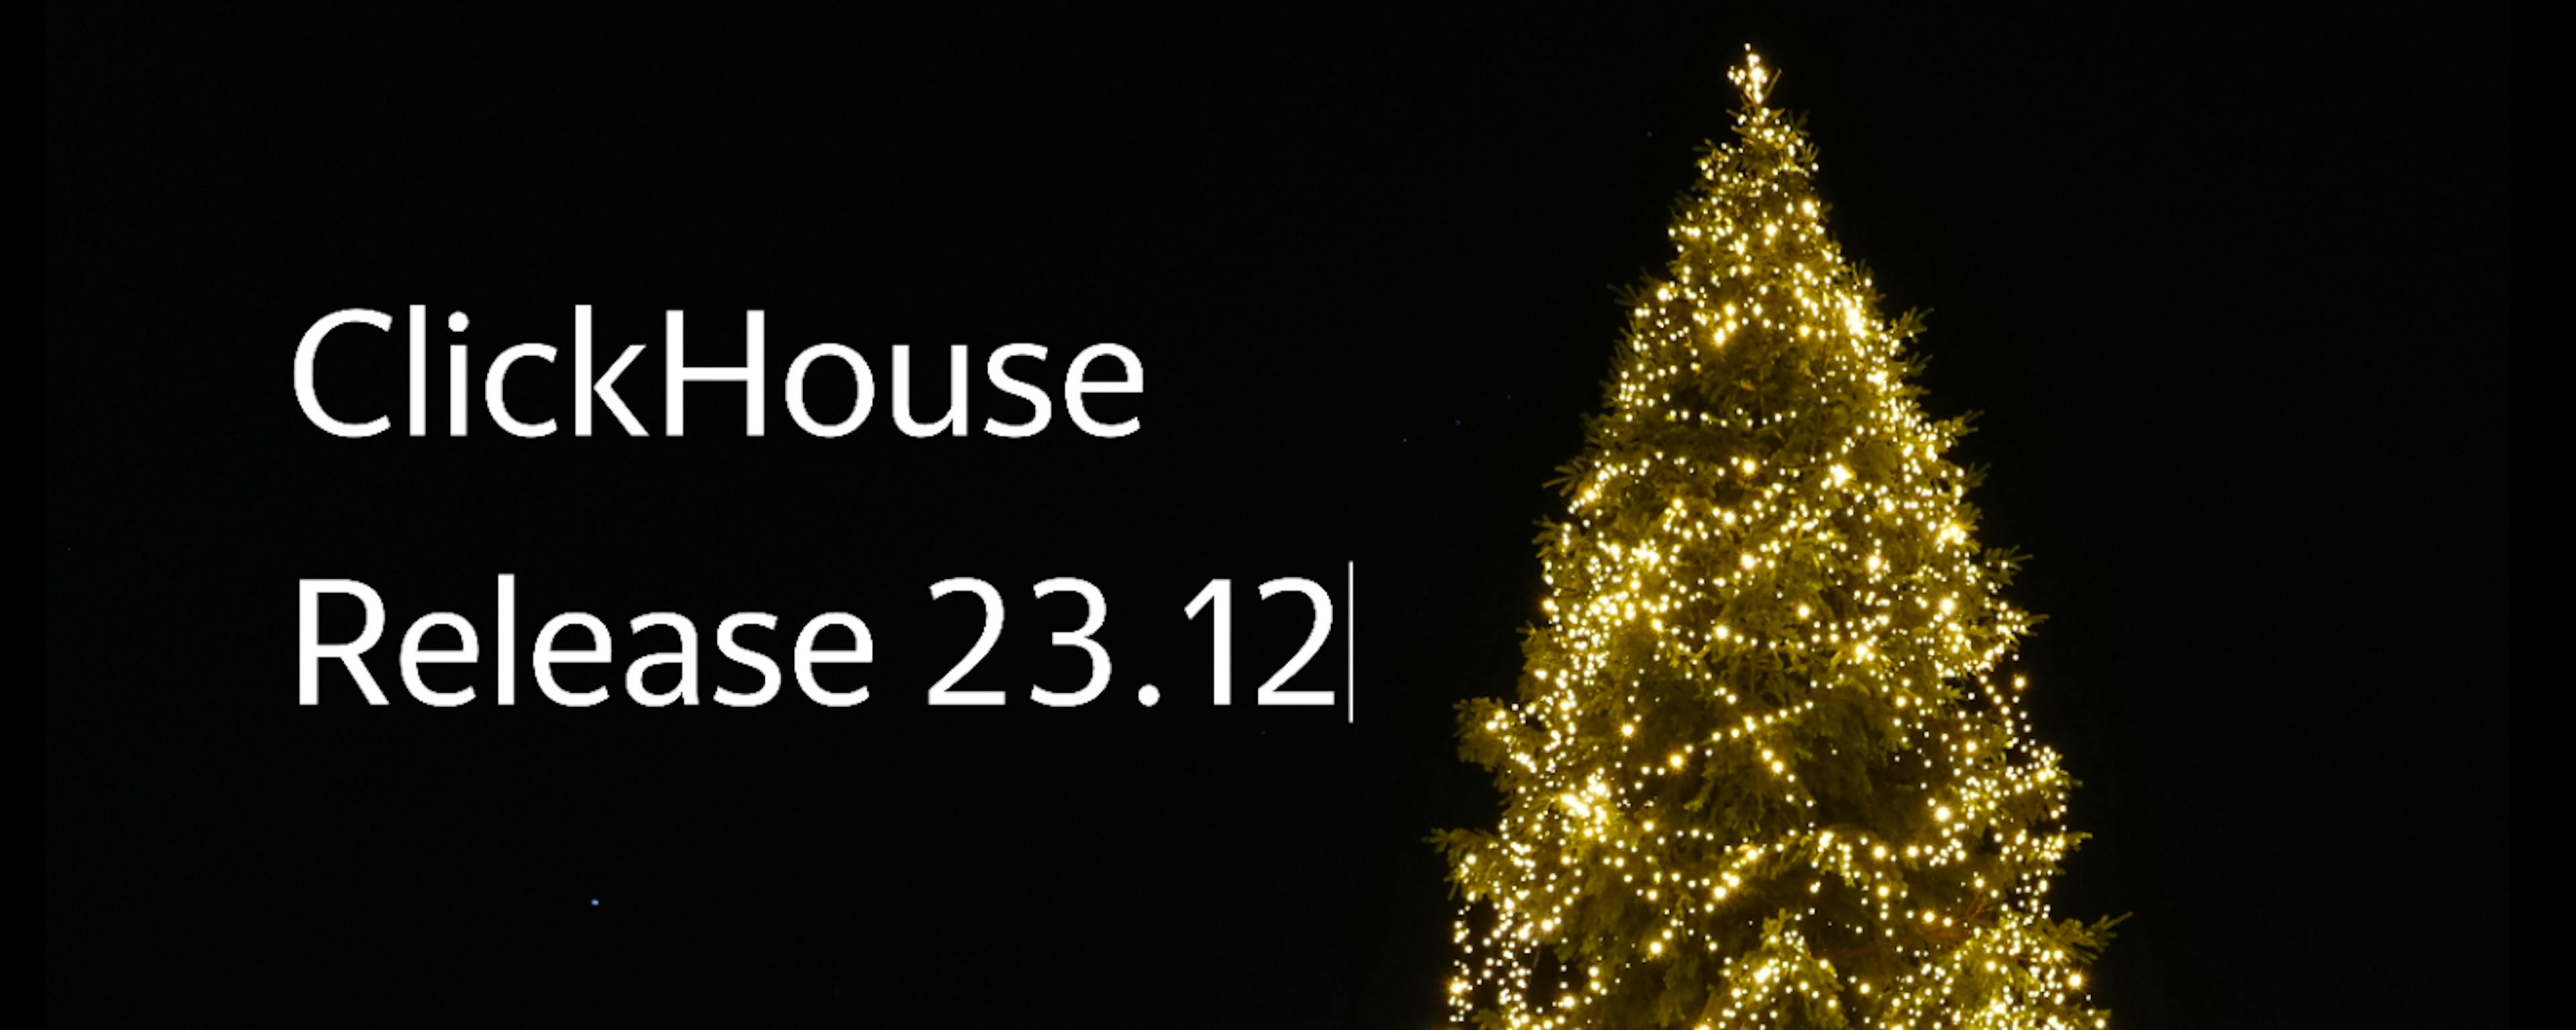 featured image - Refreshable Materialized Views and other features in ClickHouse Release 23.12